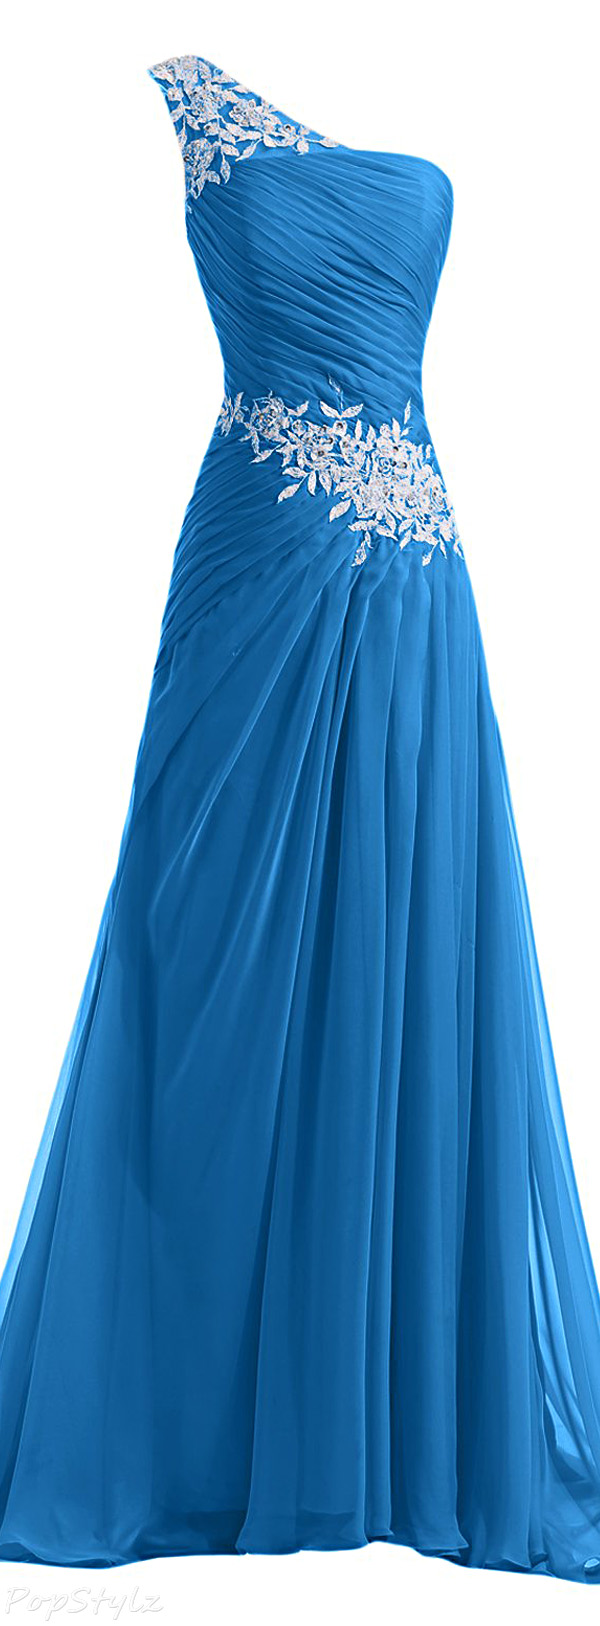 Sunvary Chiffon & Applique Long Evening Gown